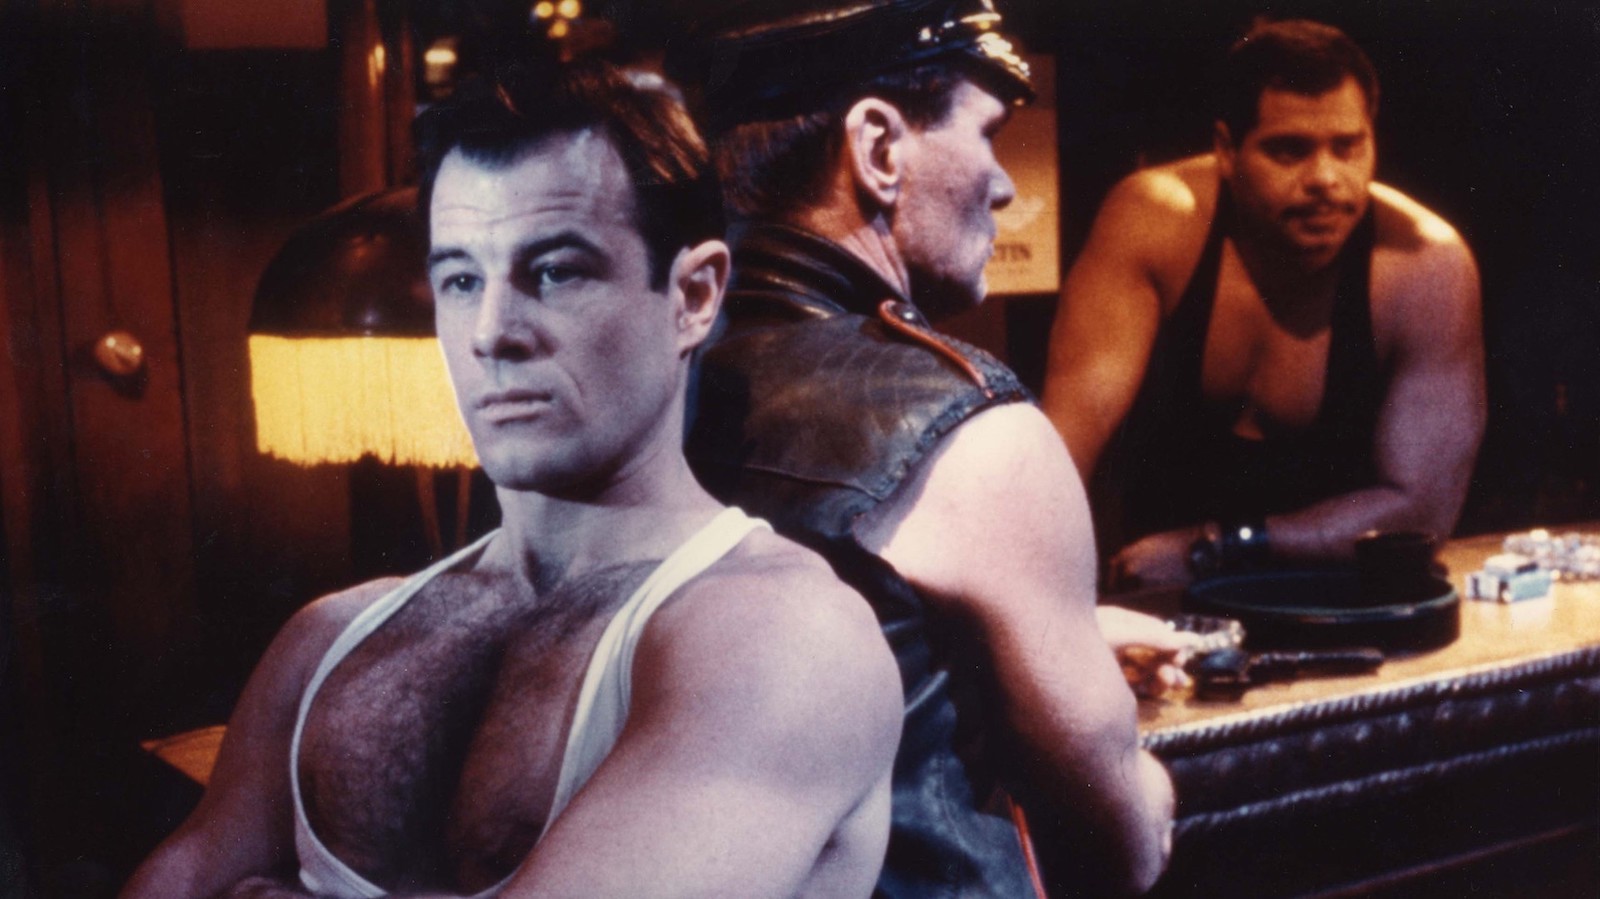 A man in a low cut tank top sits with his arms crossed, his back to another man wearing a leather cap and vest in a bar, with a bartender watching from behind them